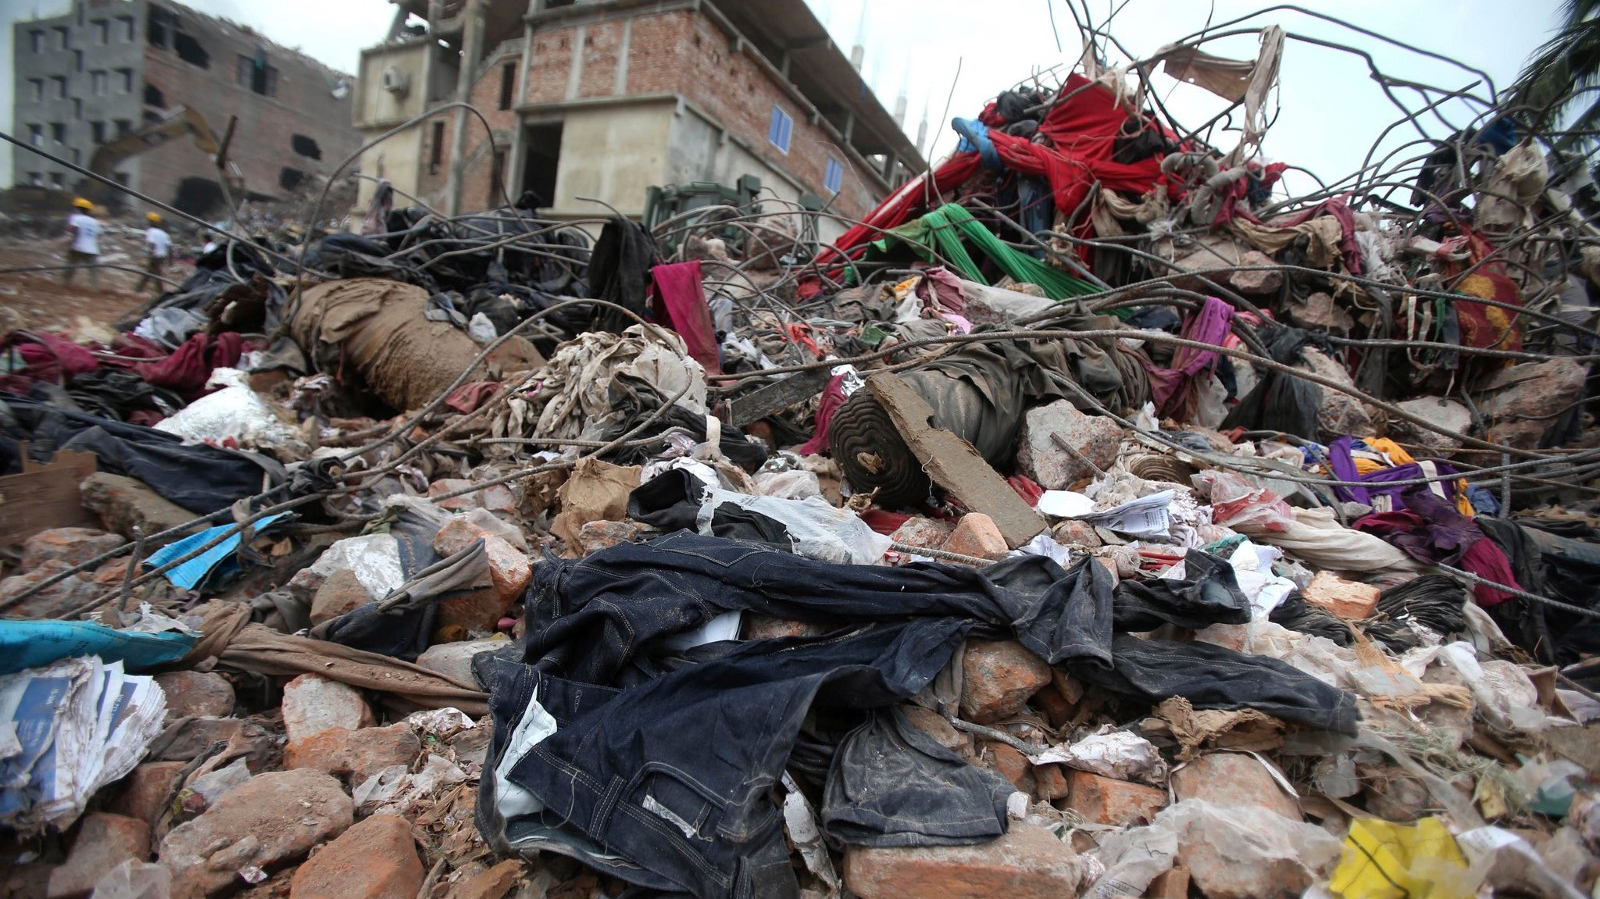 The Rana Plaza Collapse: What Happened & What it Means for the Fashion Industry